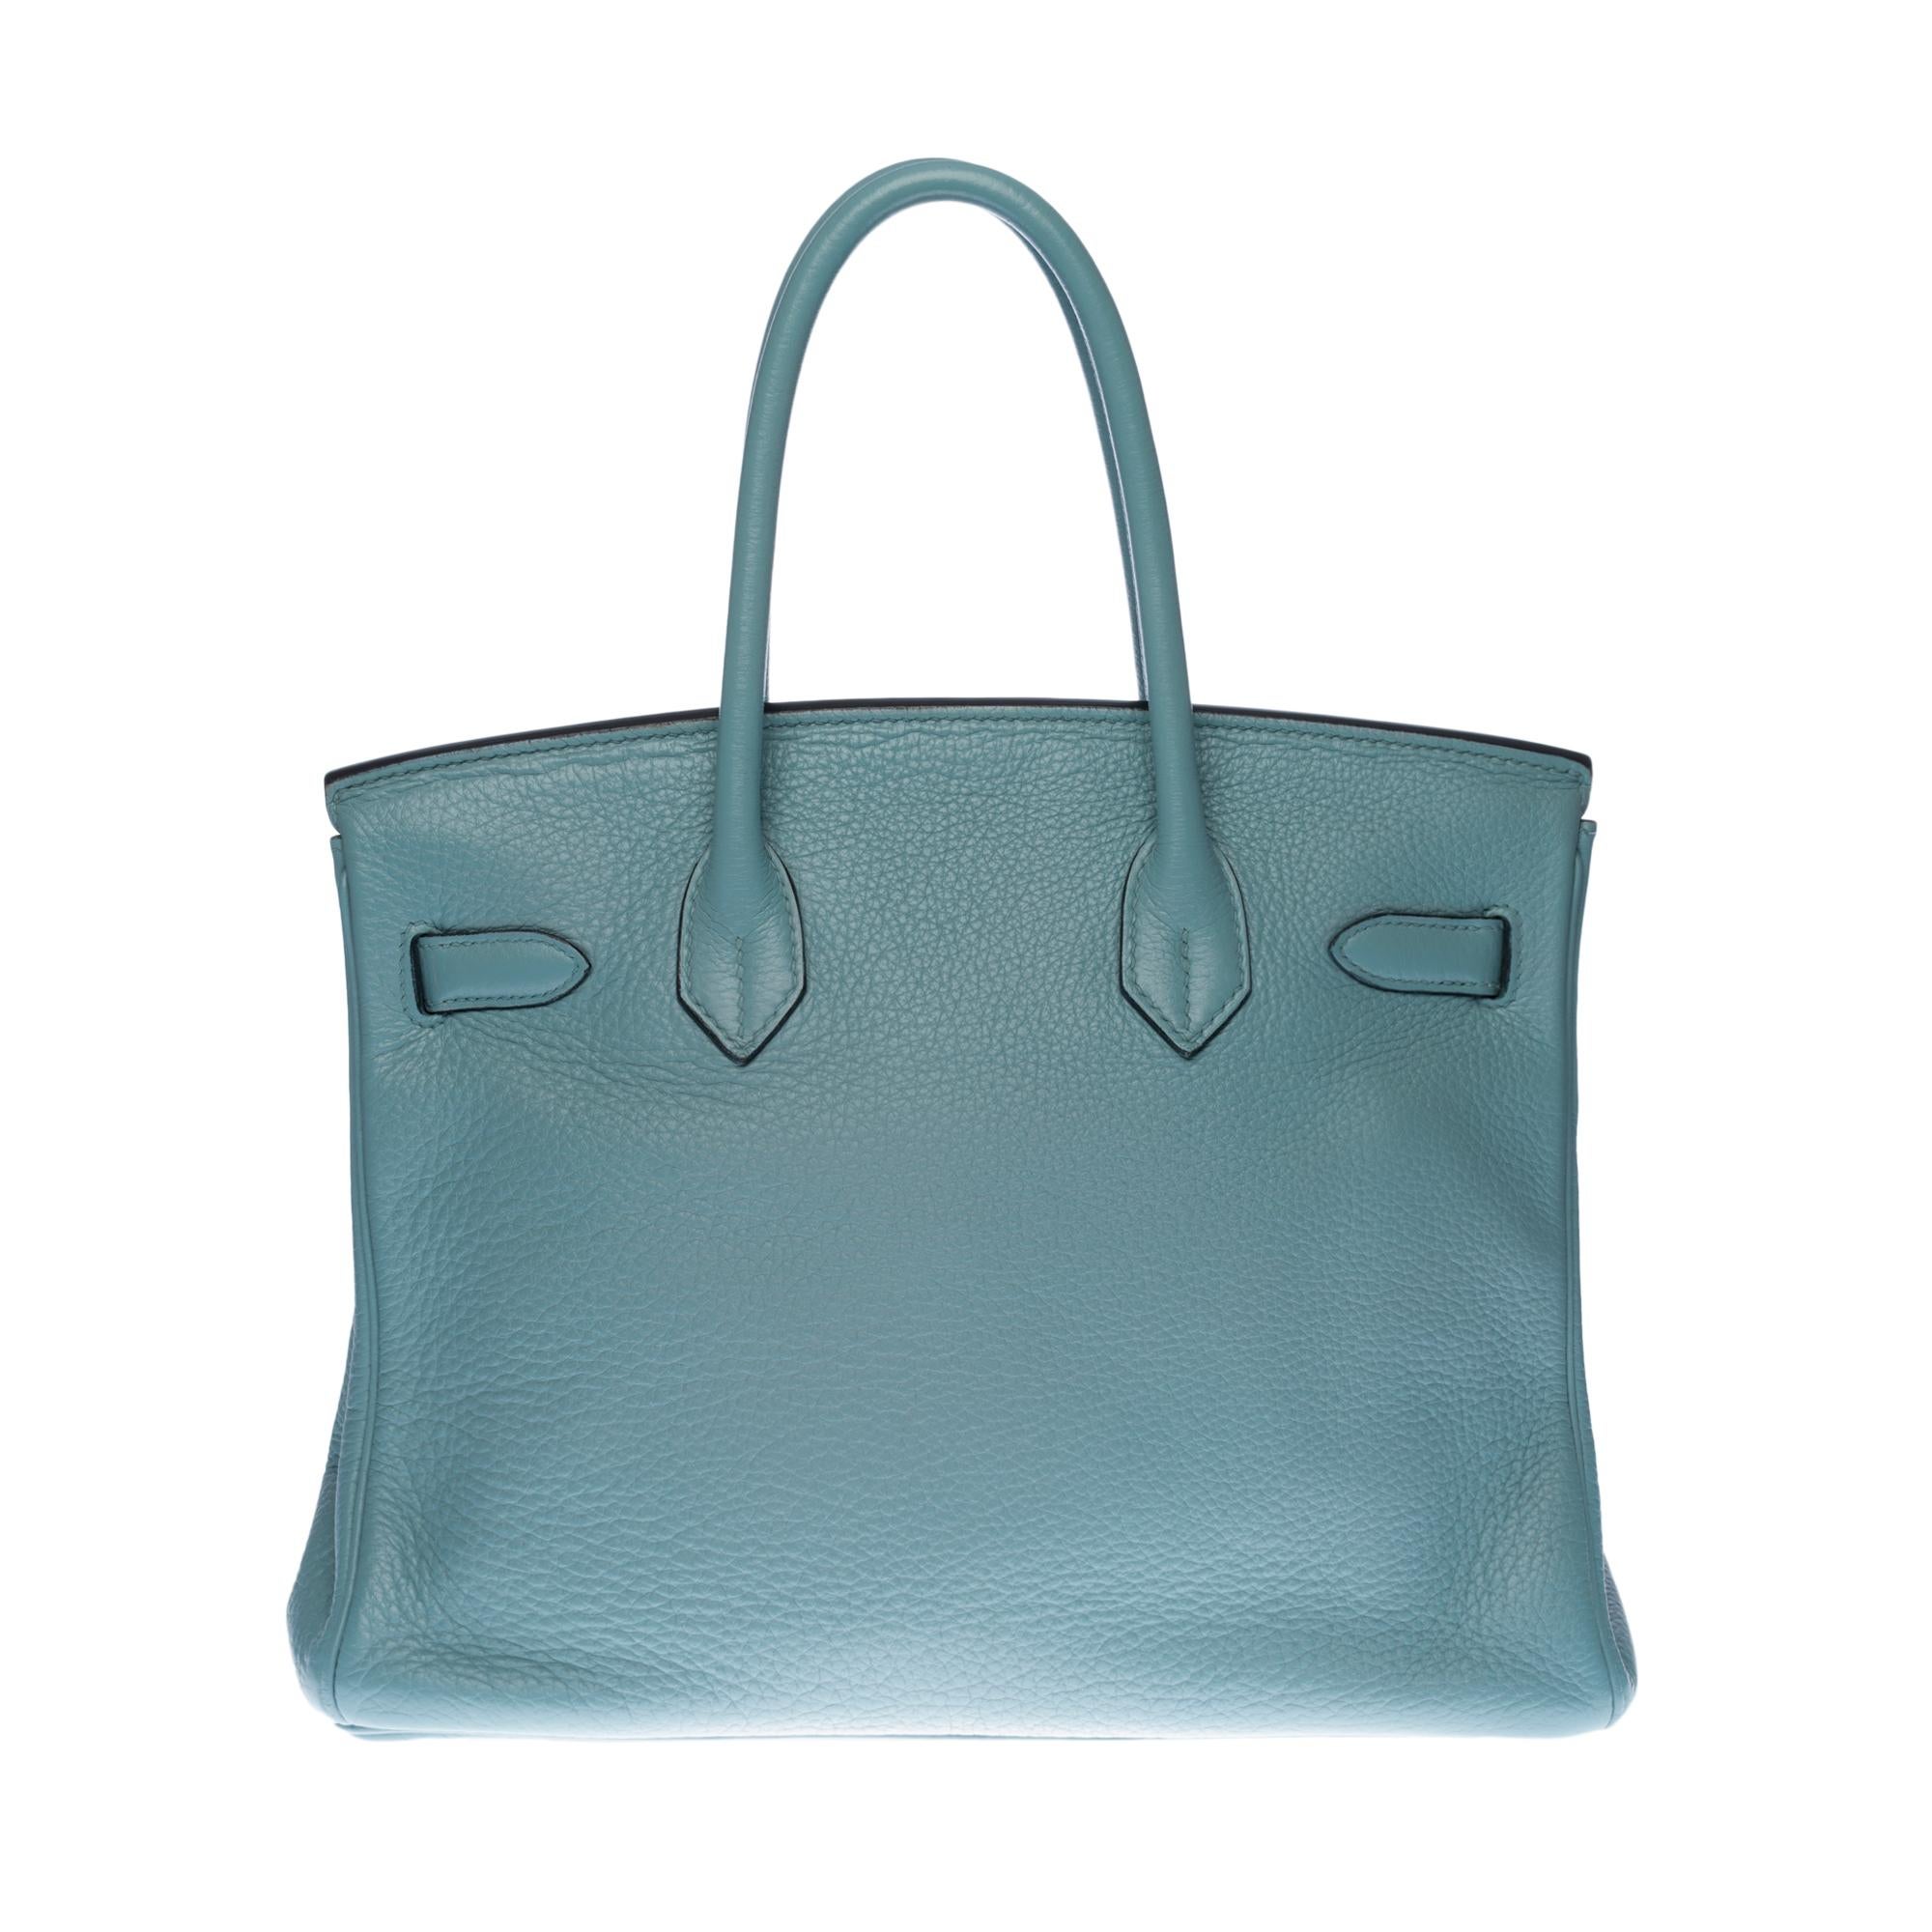 Beautiful Hermes Birkin handbag 30 cm in Bleu ciel Togo leather, Palladium silver metal hardware, double blue leather handle for a hand carry

Flap closure
Blue leather inner lining
A zipped pocket, a patch pocket
Signature: 